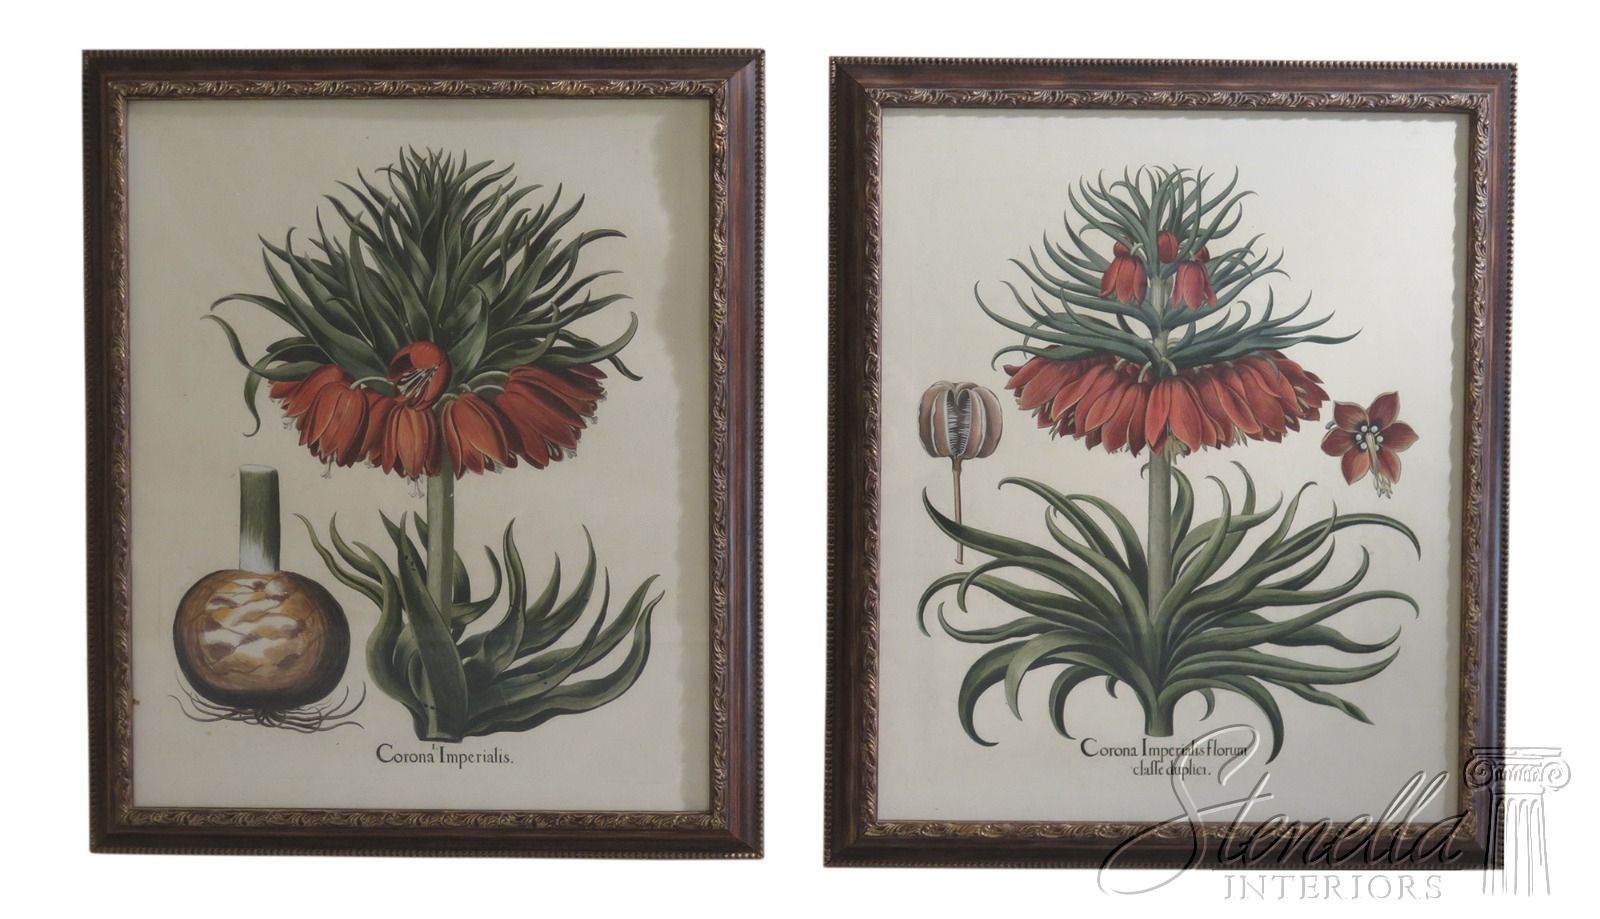 Lf31570ec: Pair Large Framed Botanical Decorative Art Within Most Popular Colorful Framed Art Prints (View 4 of 20)